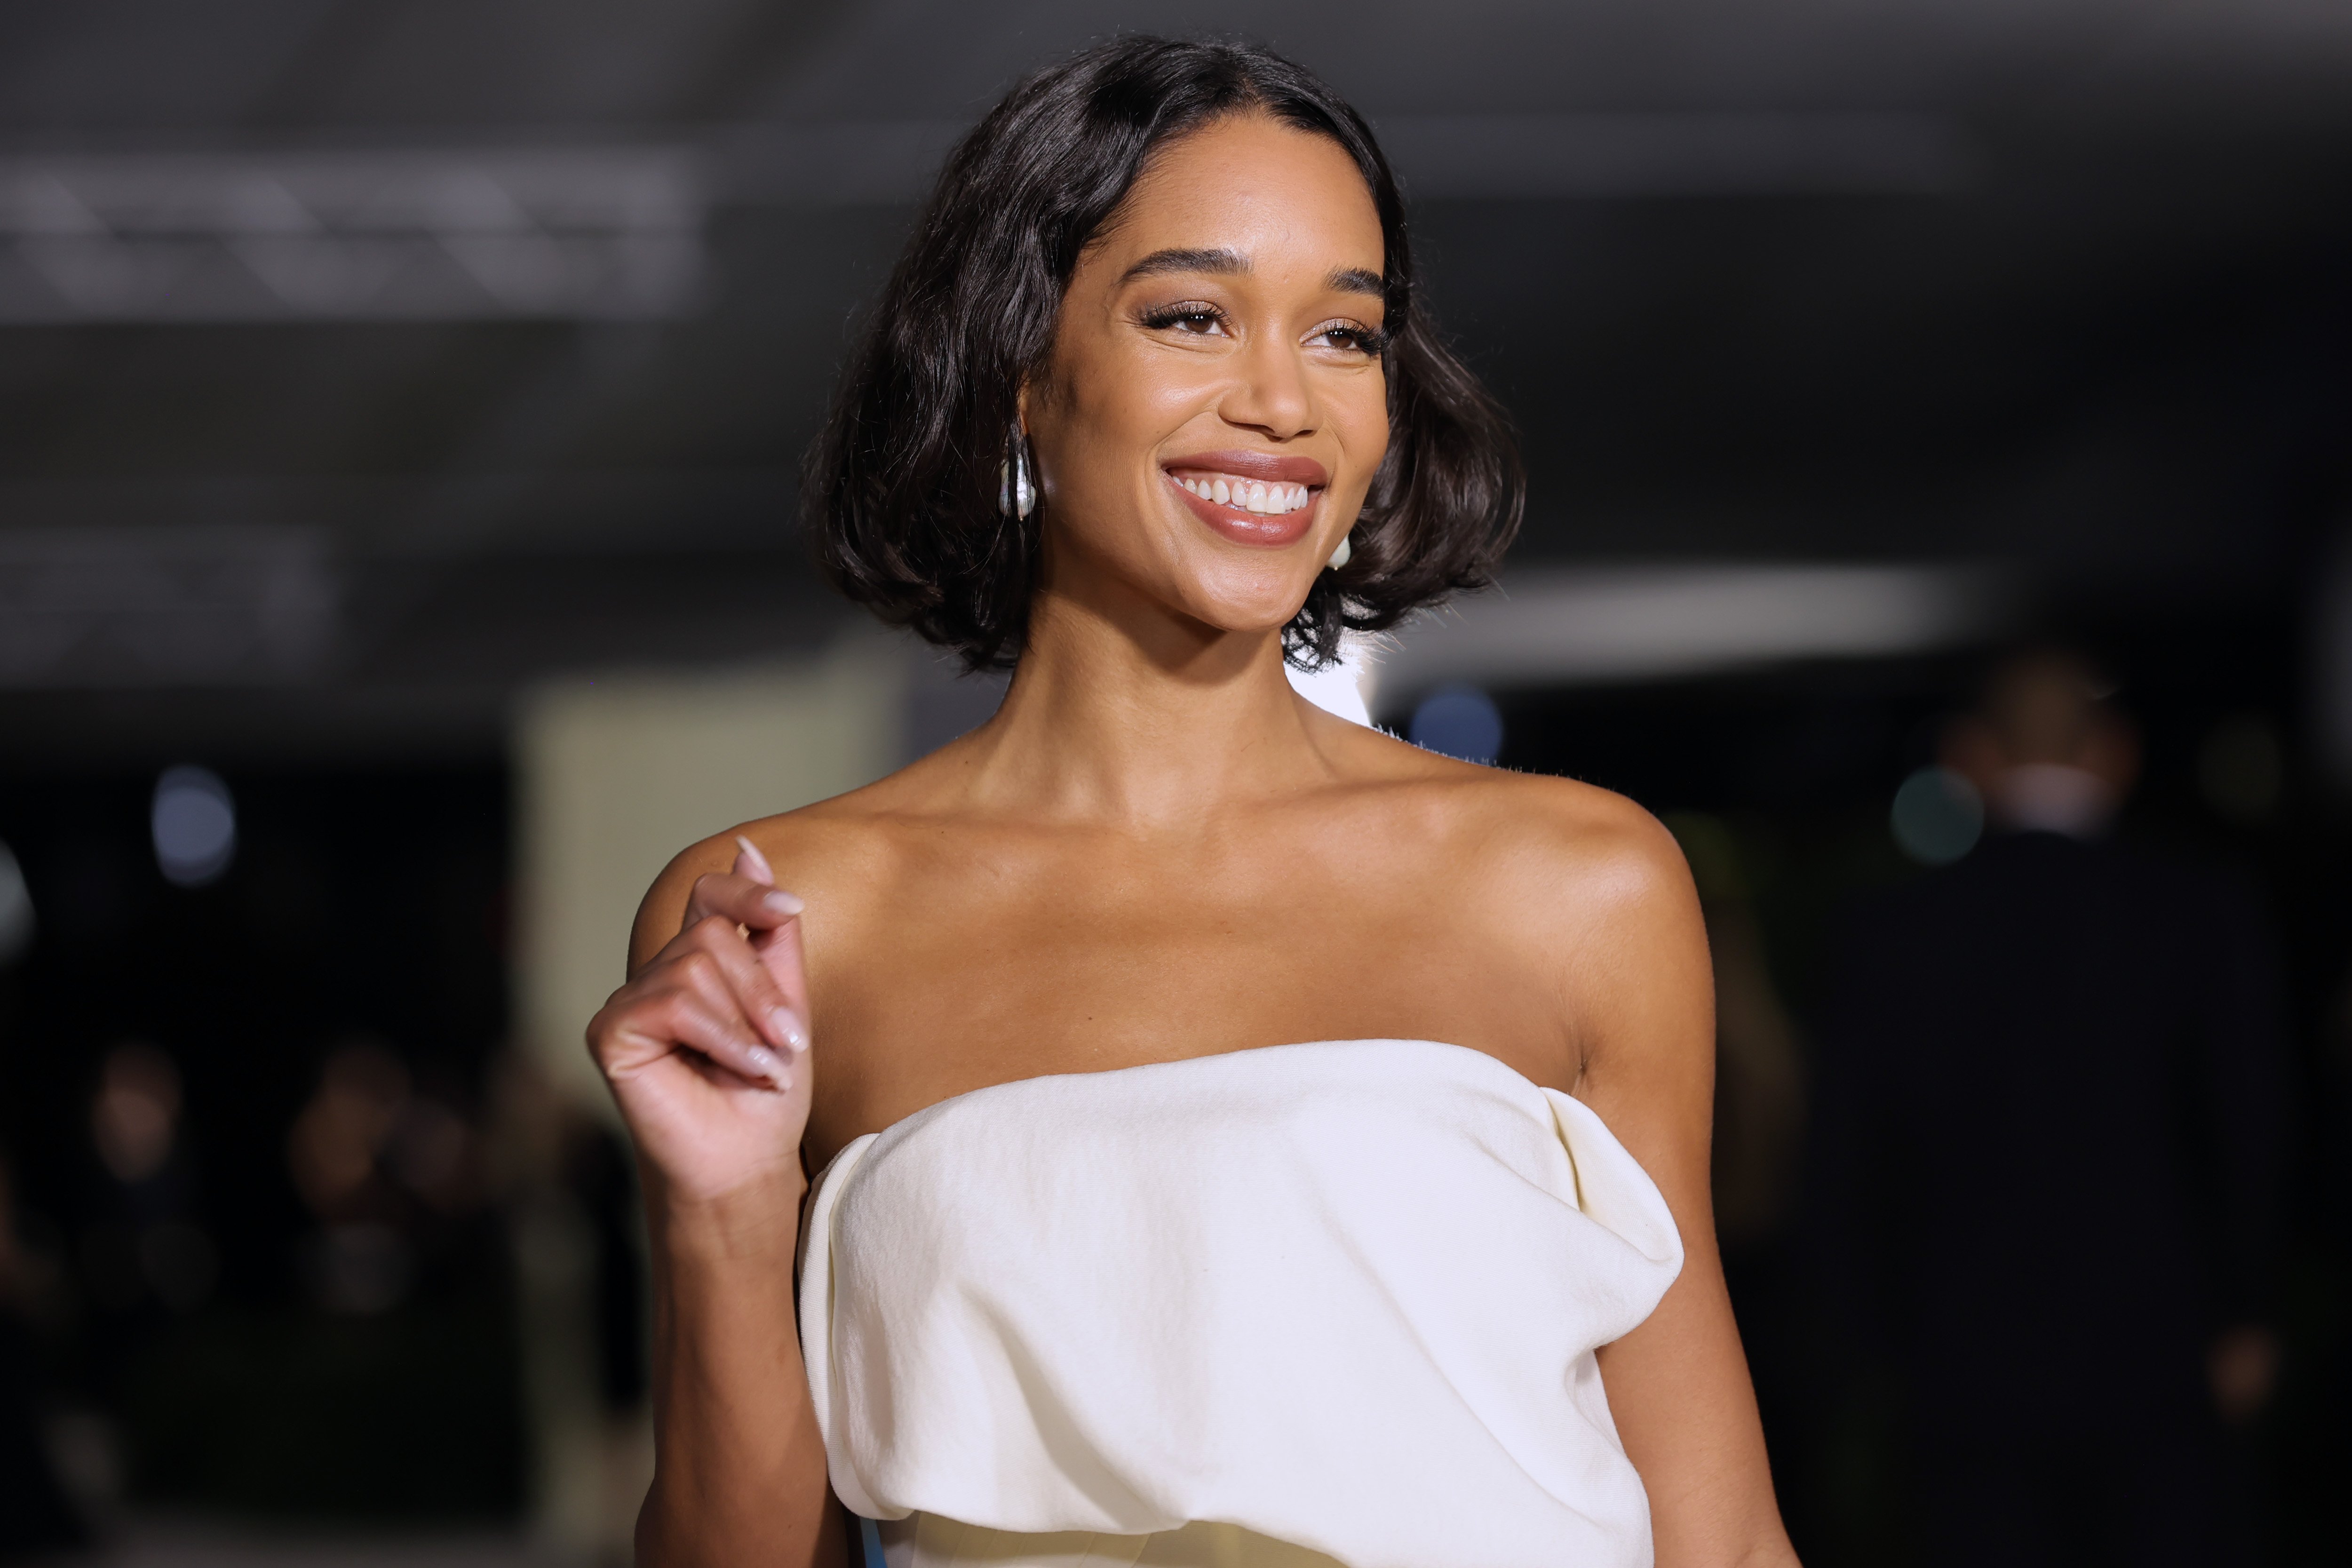 Laura Harrier during the 2nd Annual Academy Museum Gala at Academy Museum of Motion Pictures on October 15, 2022, in Los Angeles, California. | Source: Getty Images